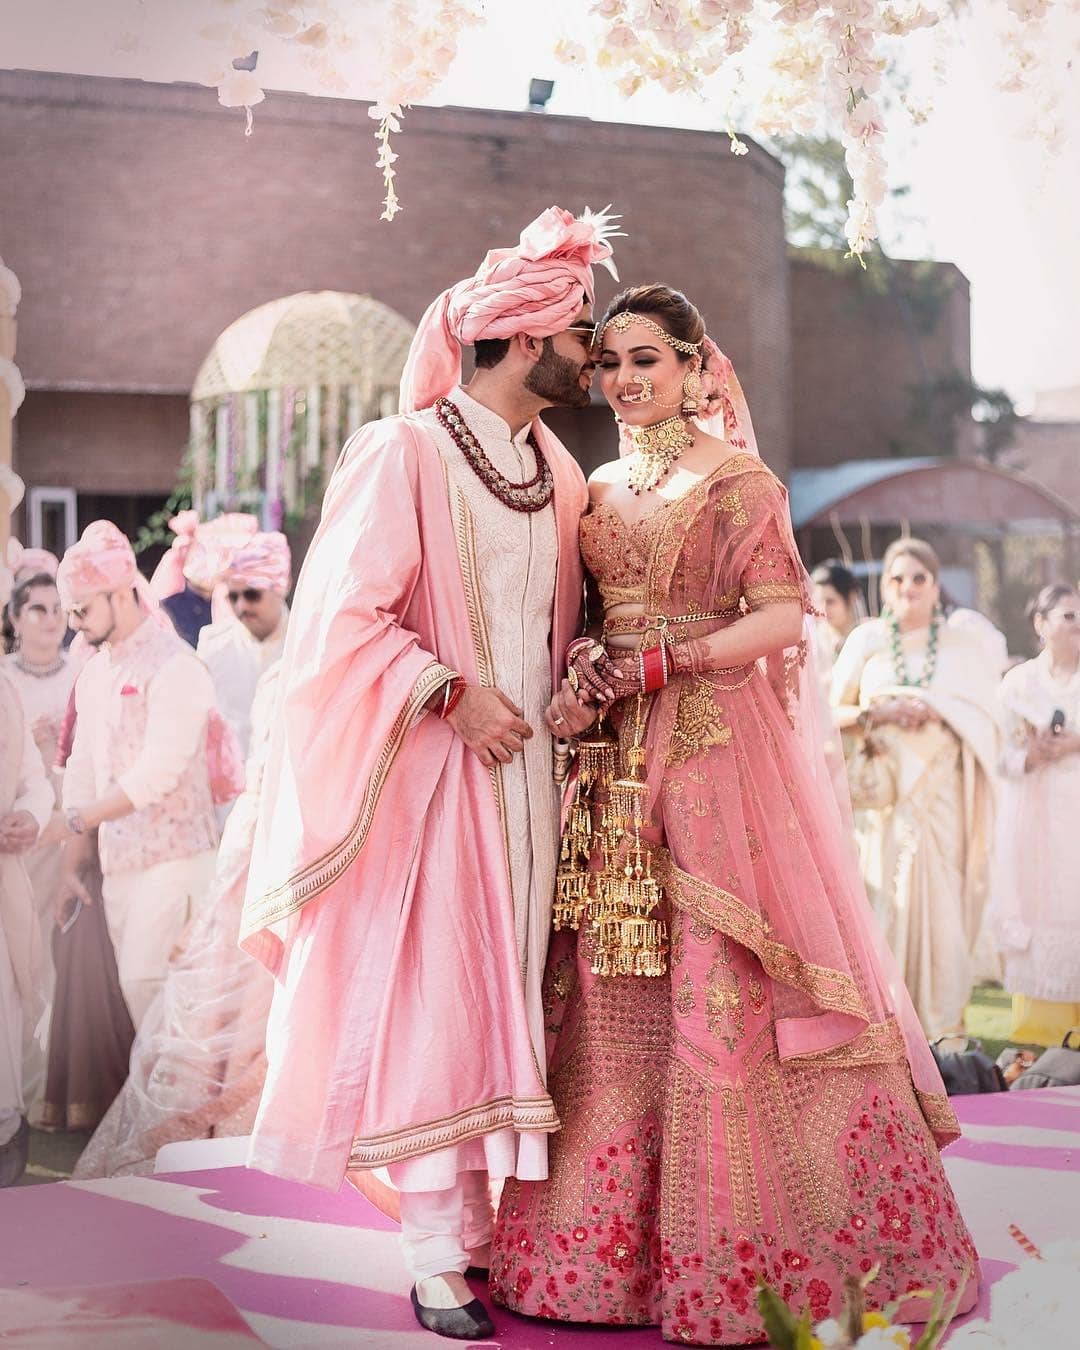 Powder pink and blush pink combination: Bride and Groom Wedding Dress Colour Combinations